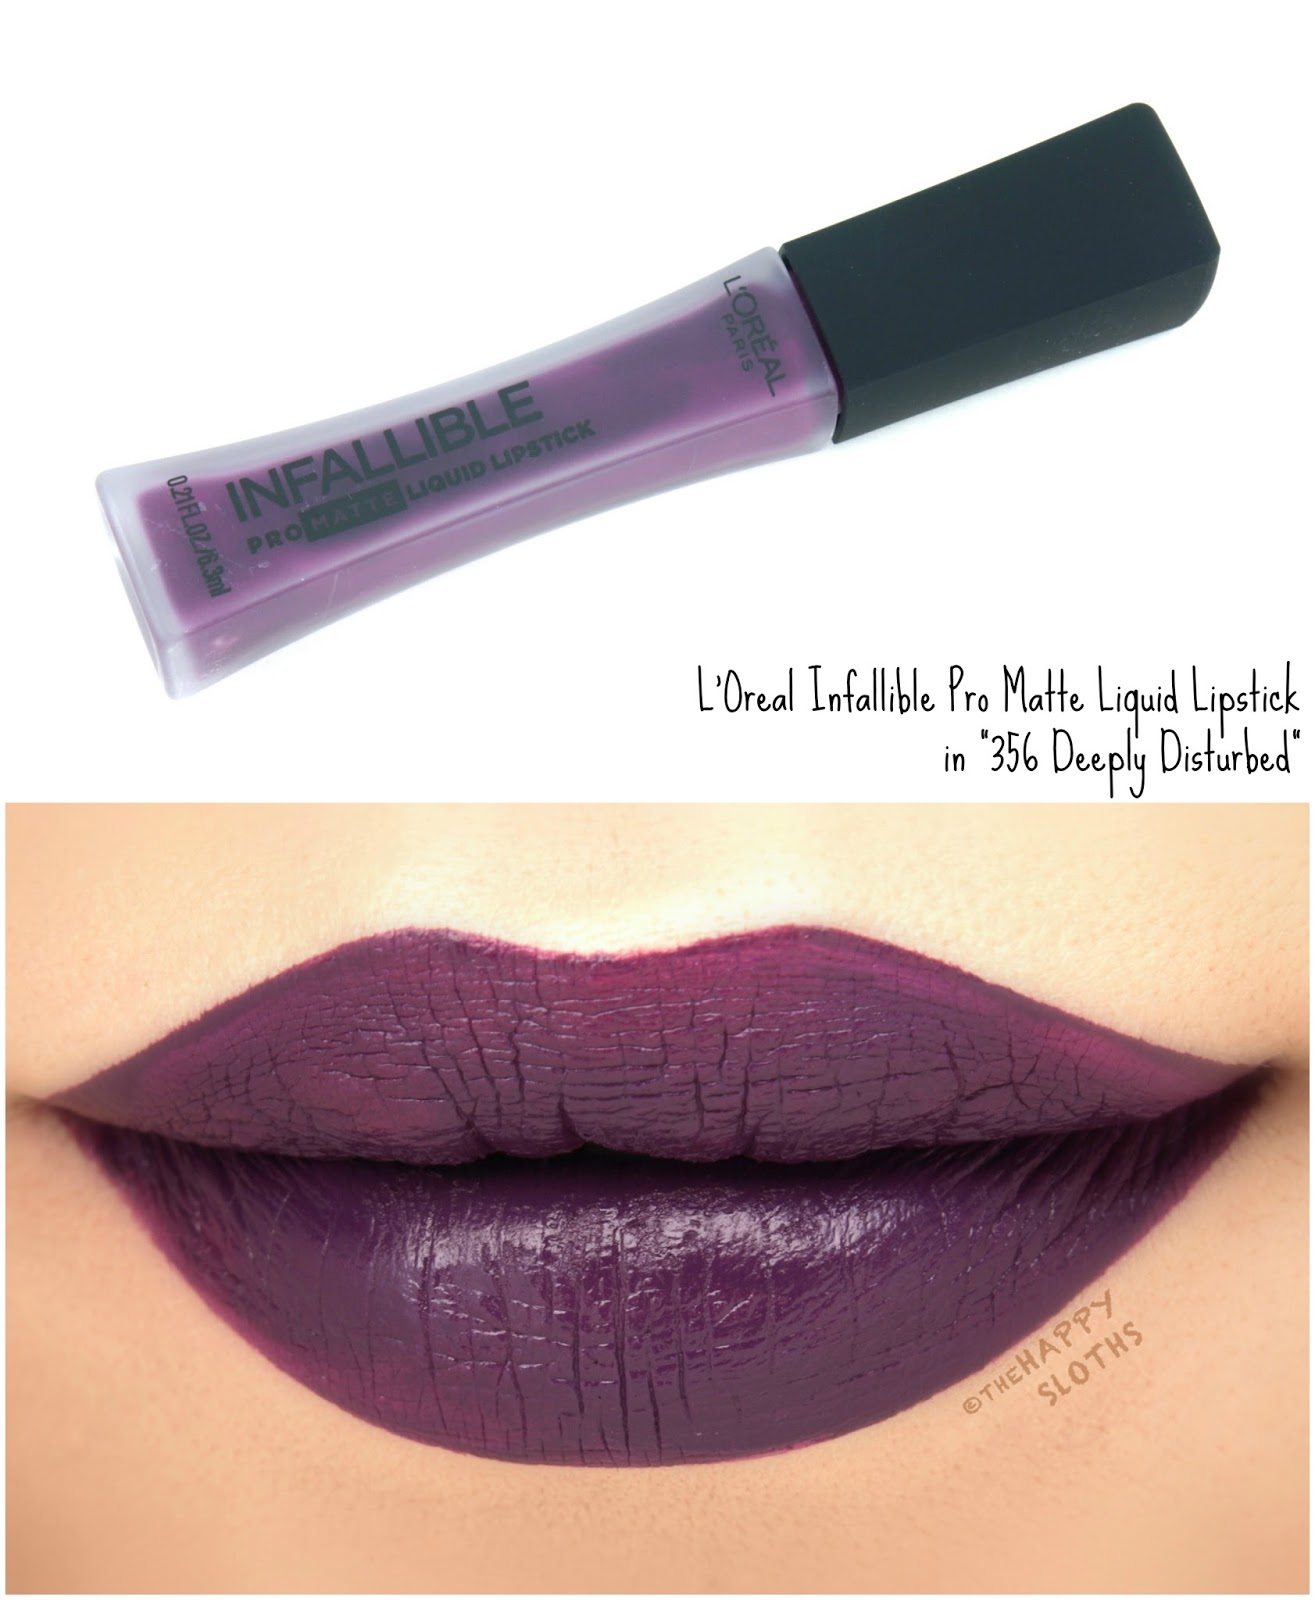 L'Oreal Infallible Pro Matte Liquid Lipsticks "356 Deeply Disturbed": Review and Swatches